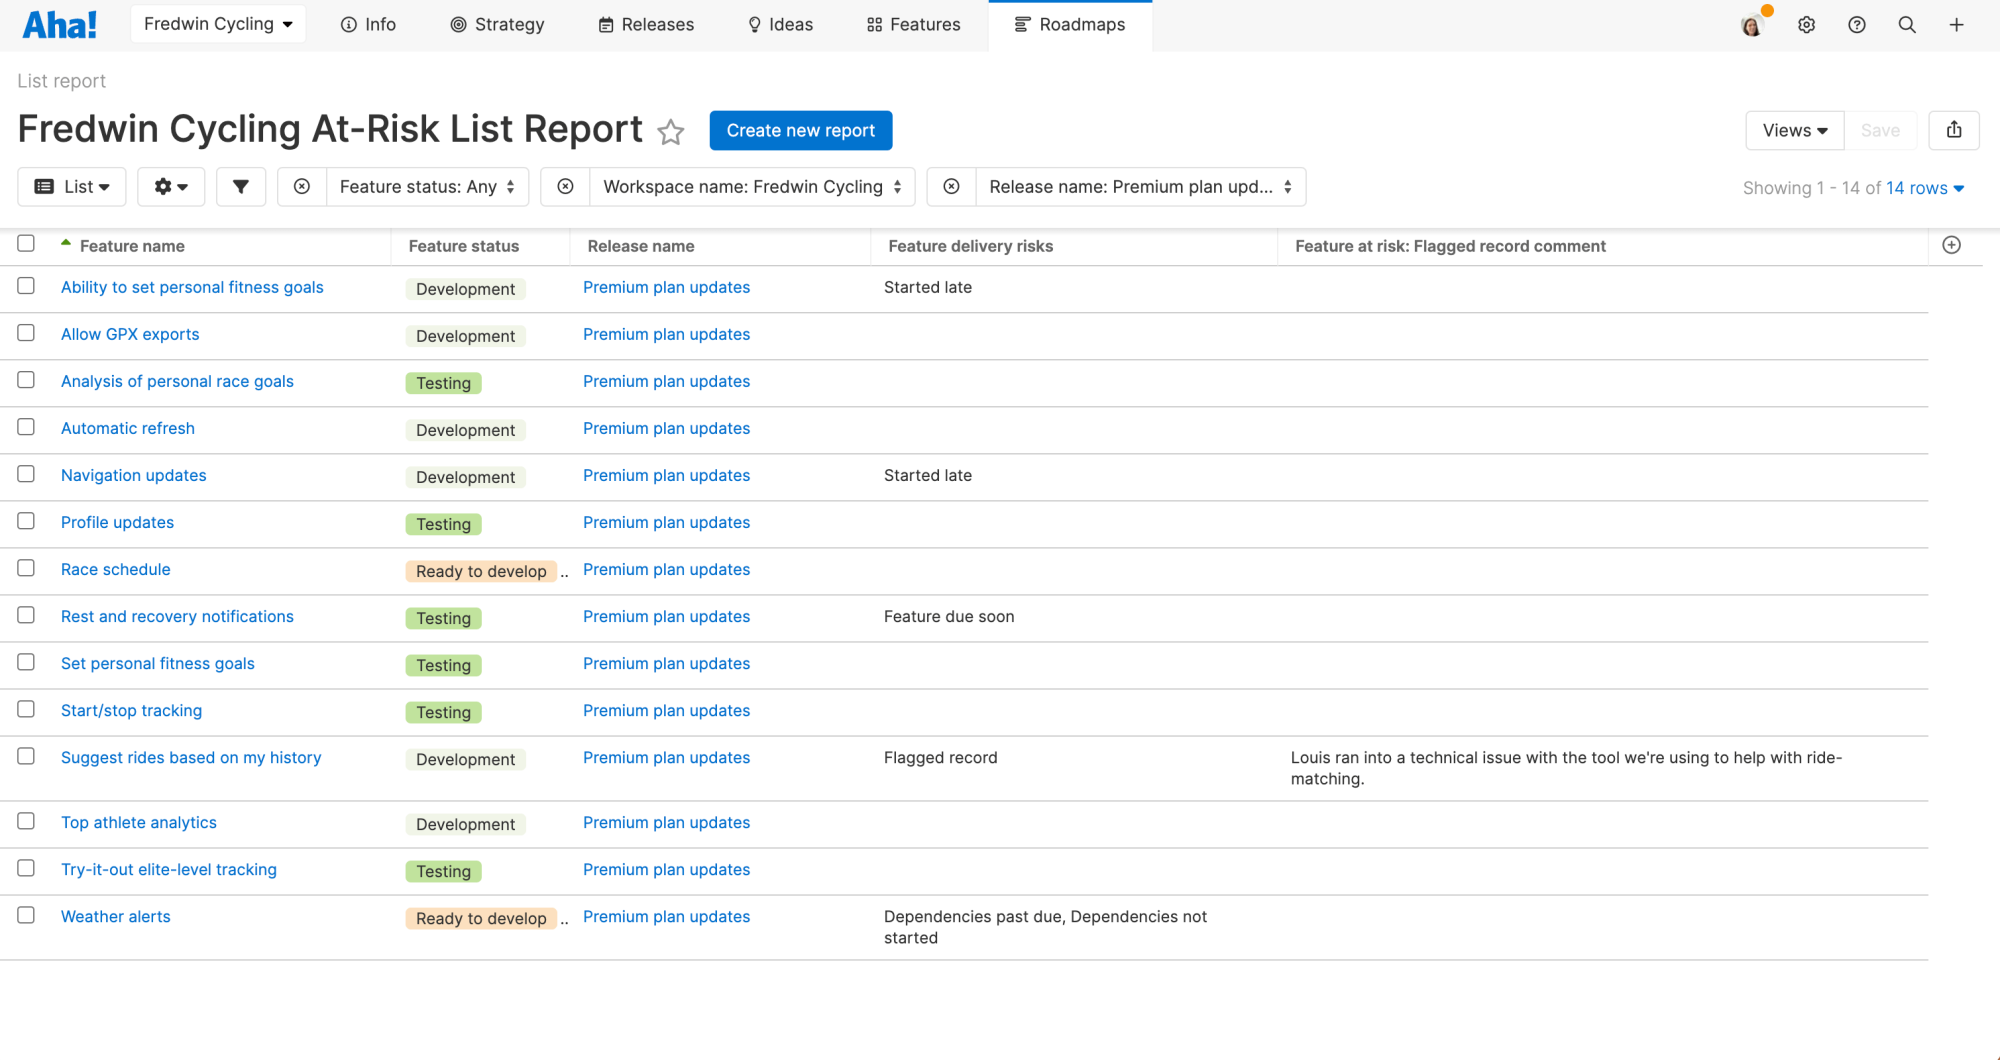 Add the "Flagged record comment" field to list reports to see the description for manually flagged records.